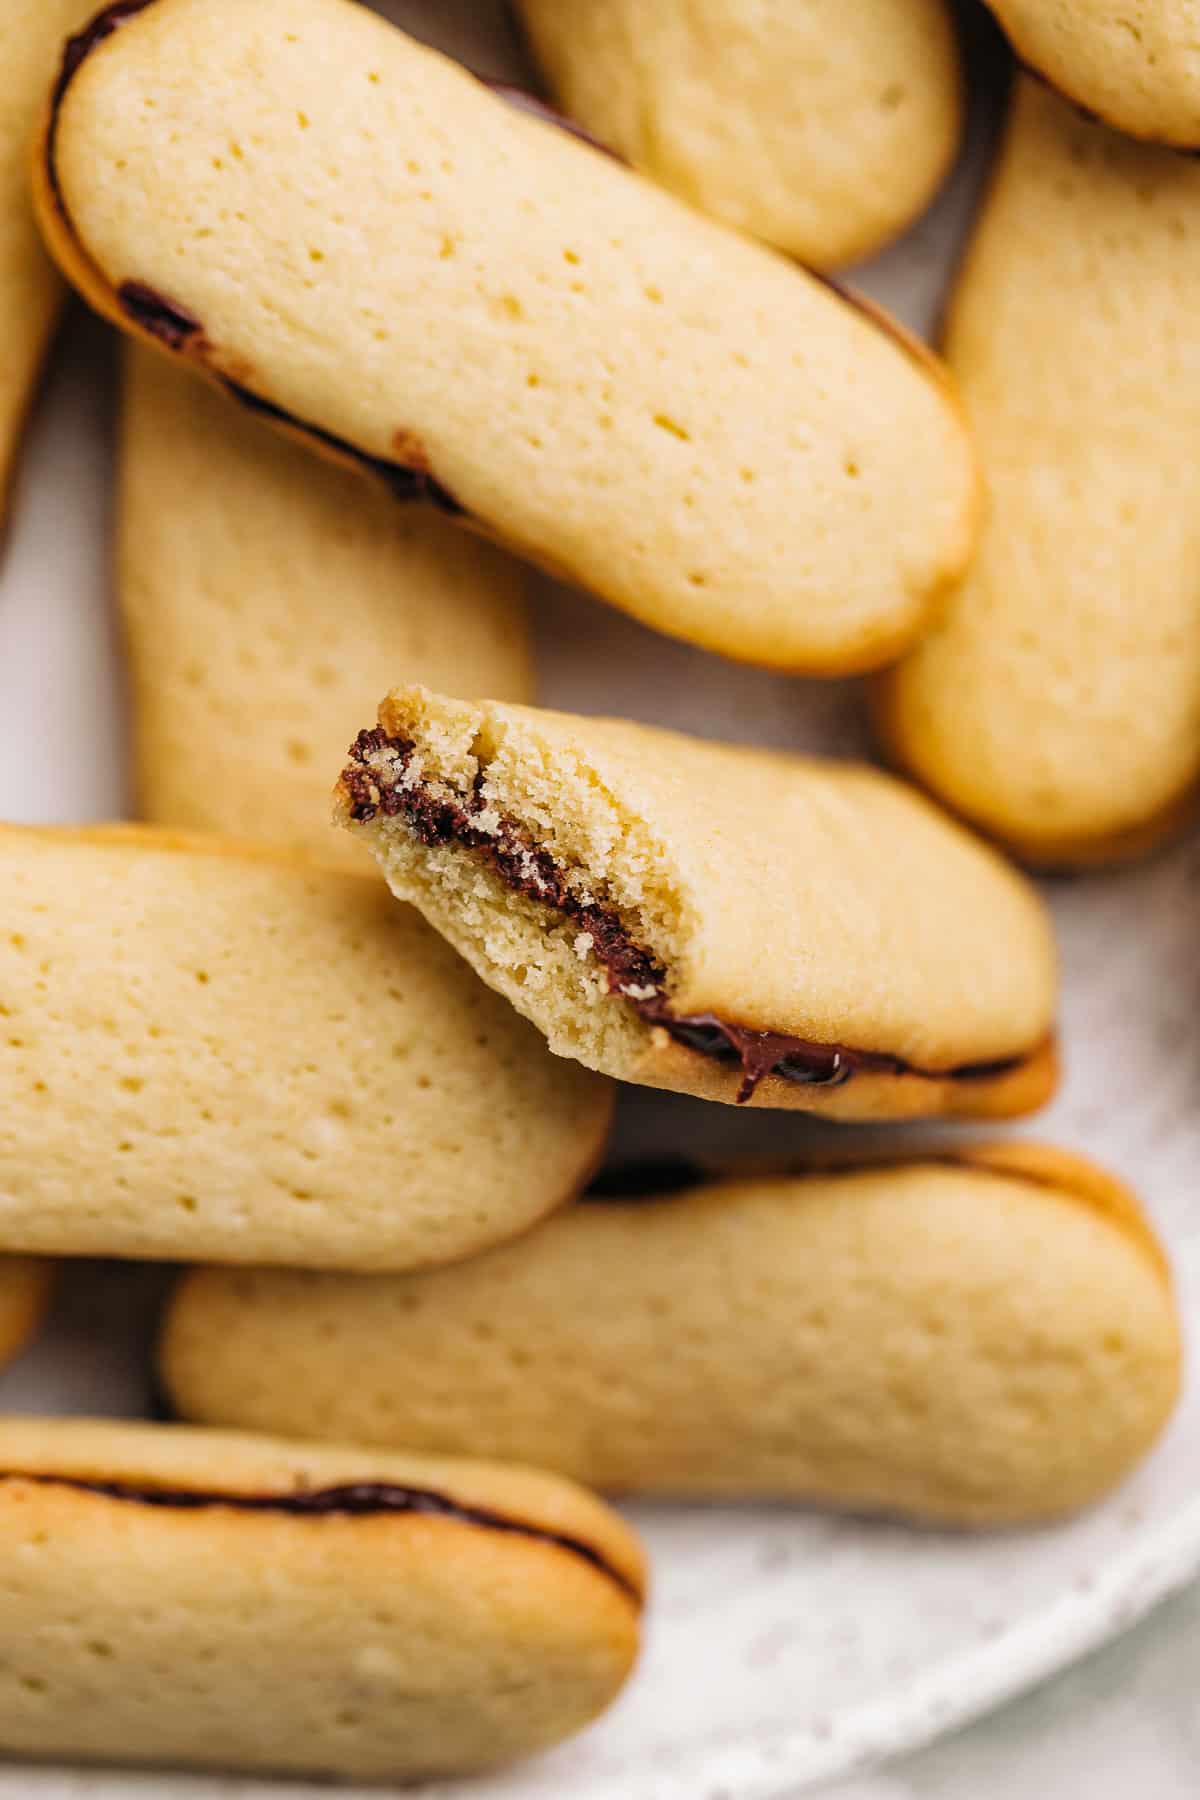 Bite shot of a Milano cookie.